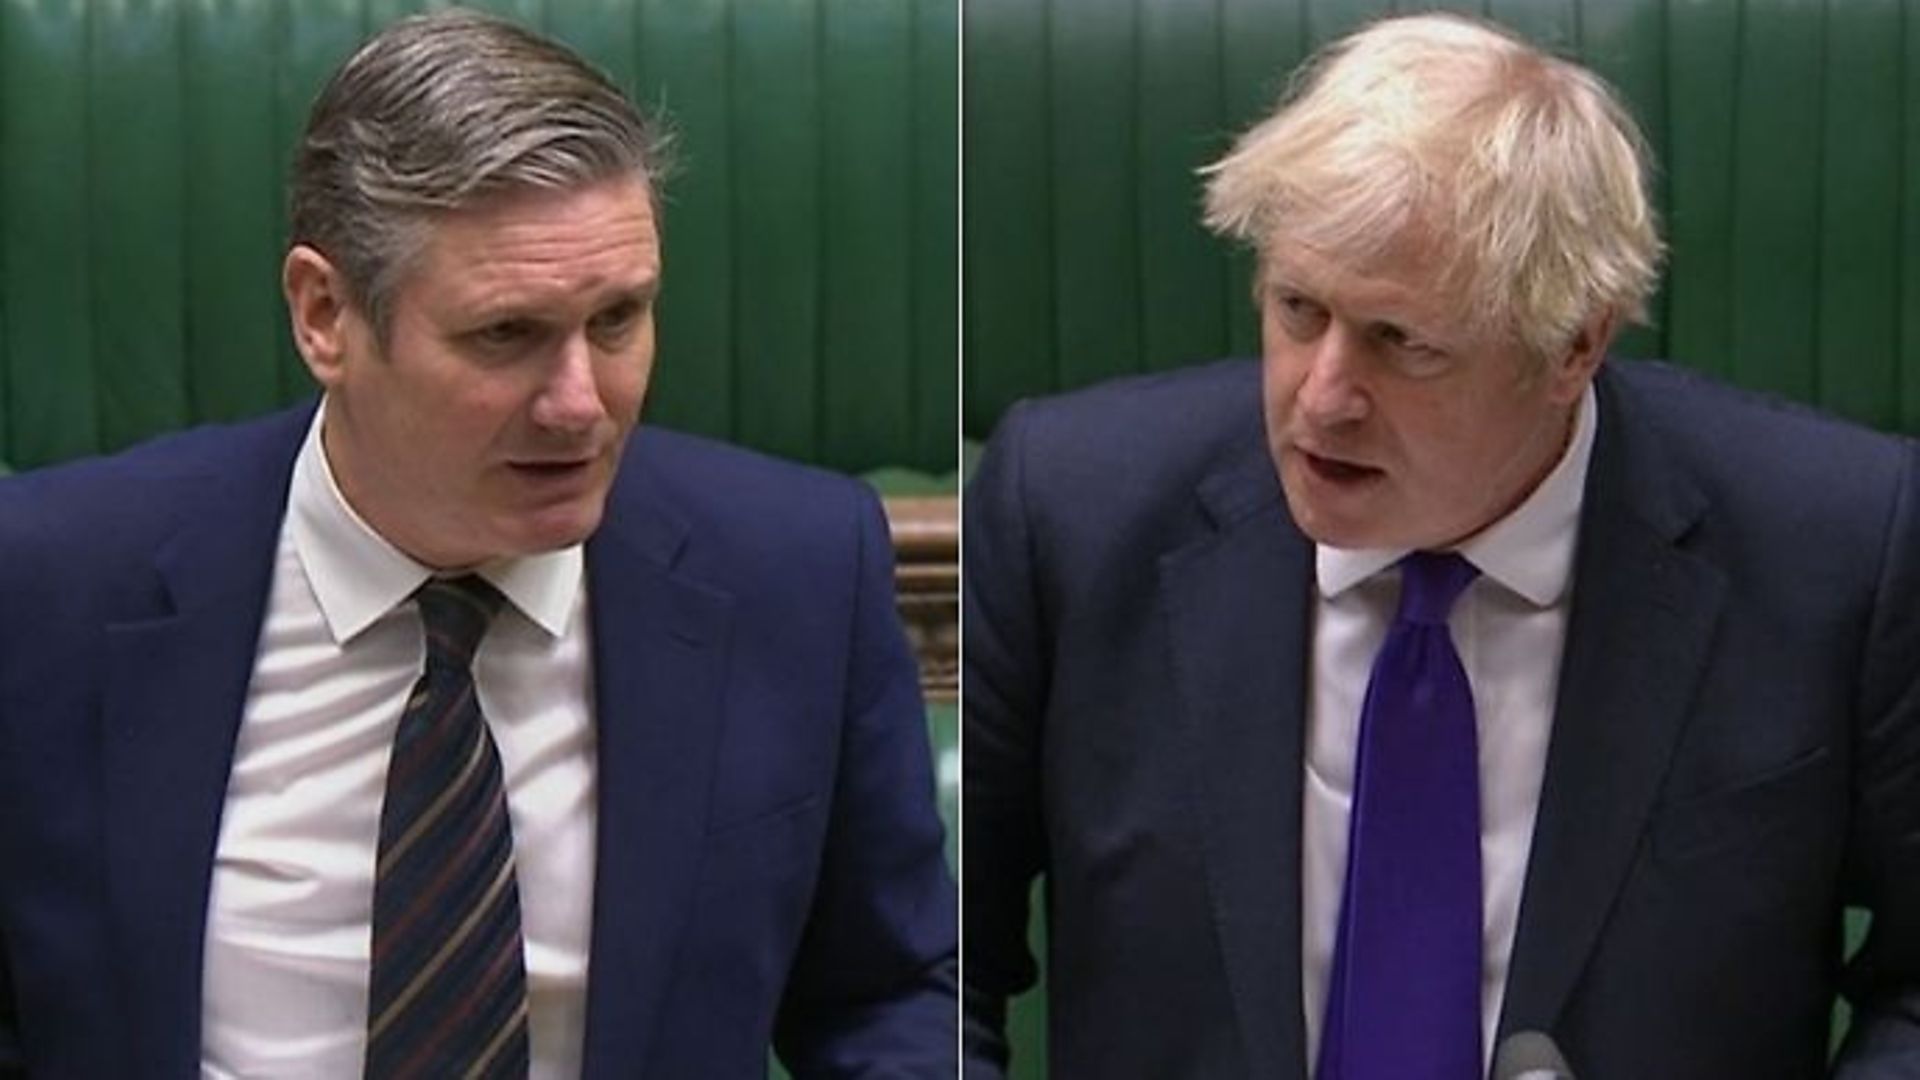 Keir Starmer (L) and Boris Johnson during a session of Prime Minister's Questions - Credit: PA media